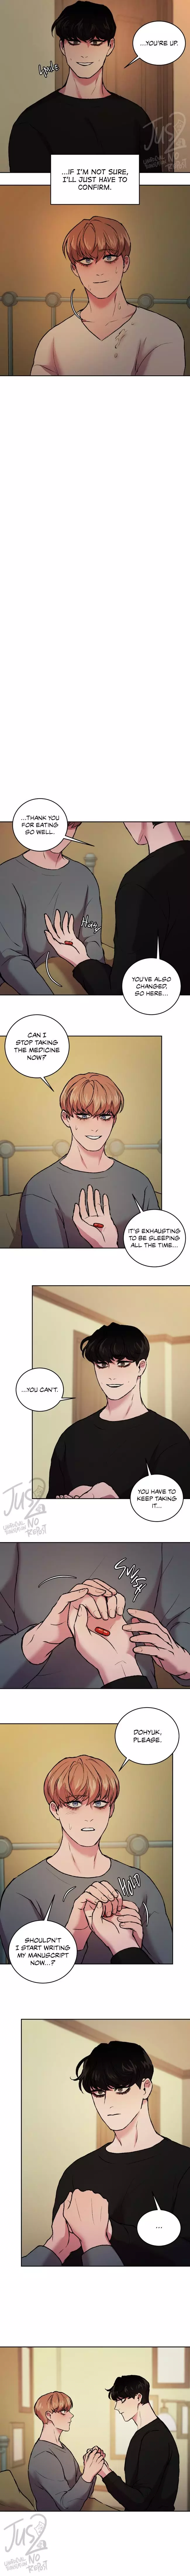 Hwanyoung's Misery - 7 page 7-35197f2c